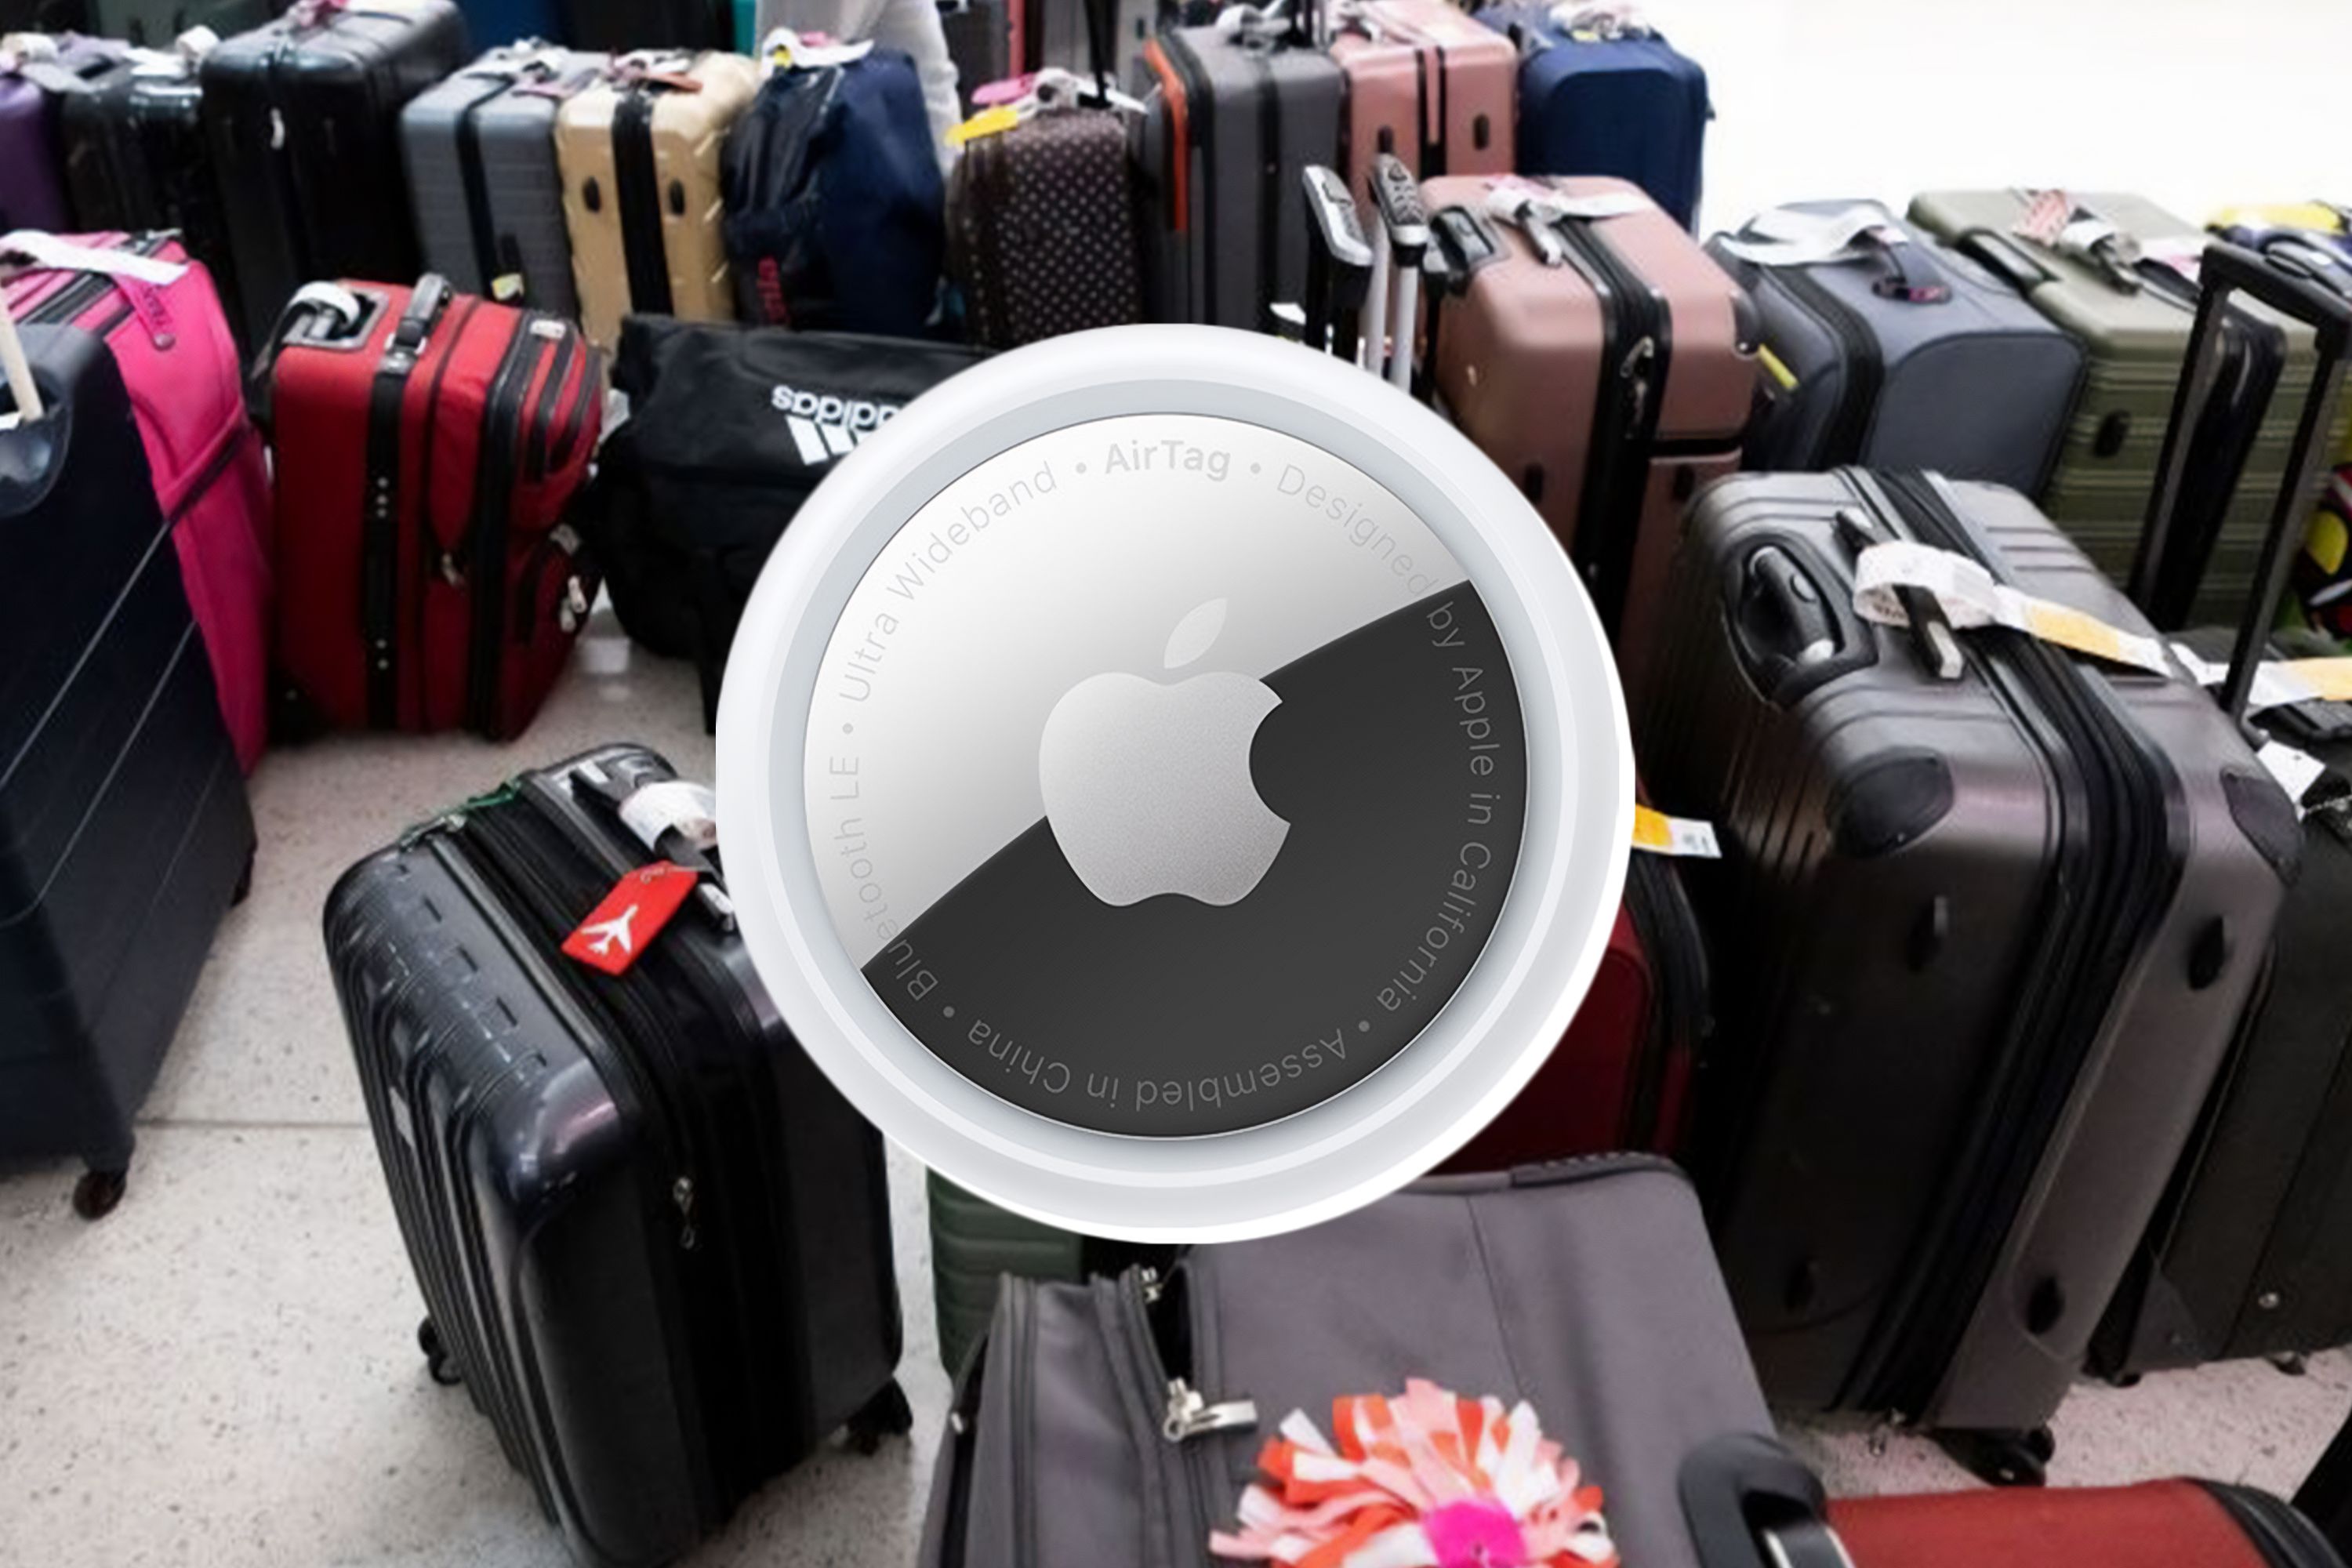 Is Apple allowed in hand luggage?